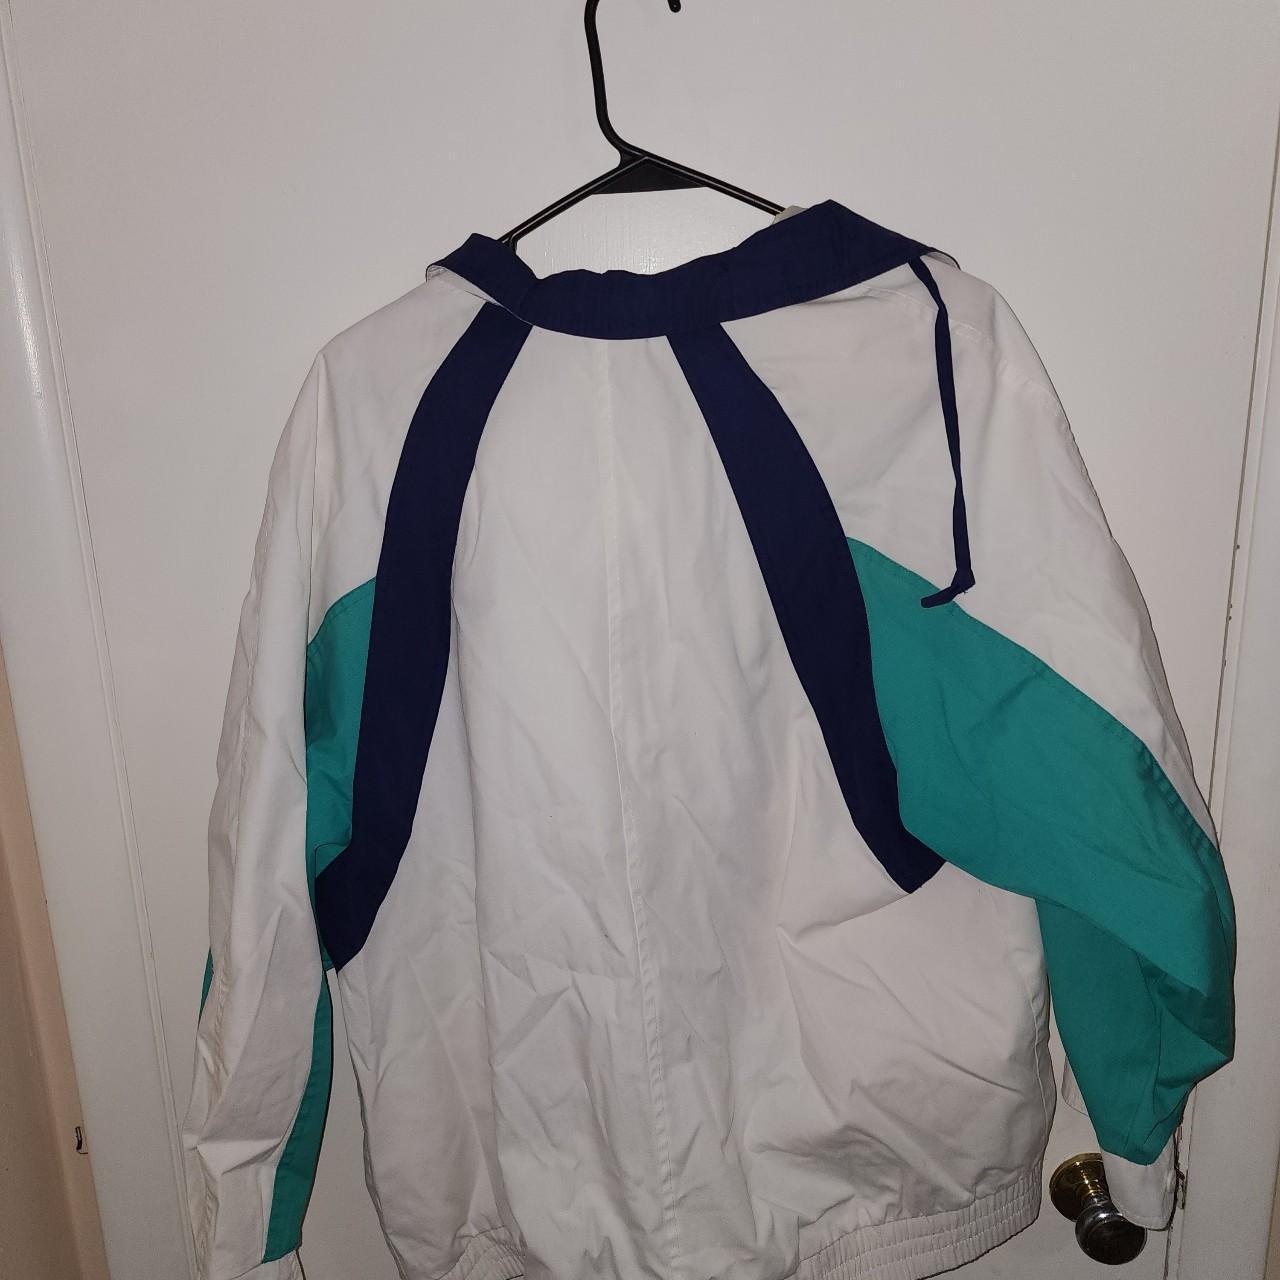 Current Seen Men's White and Blue Jacket (3)